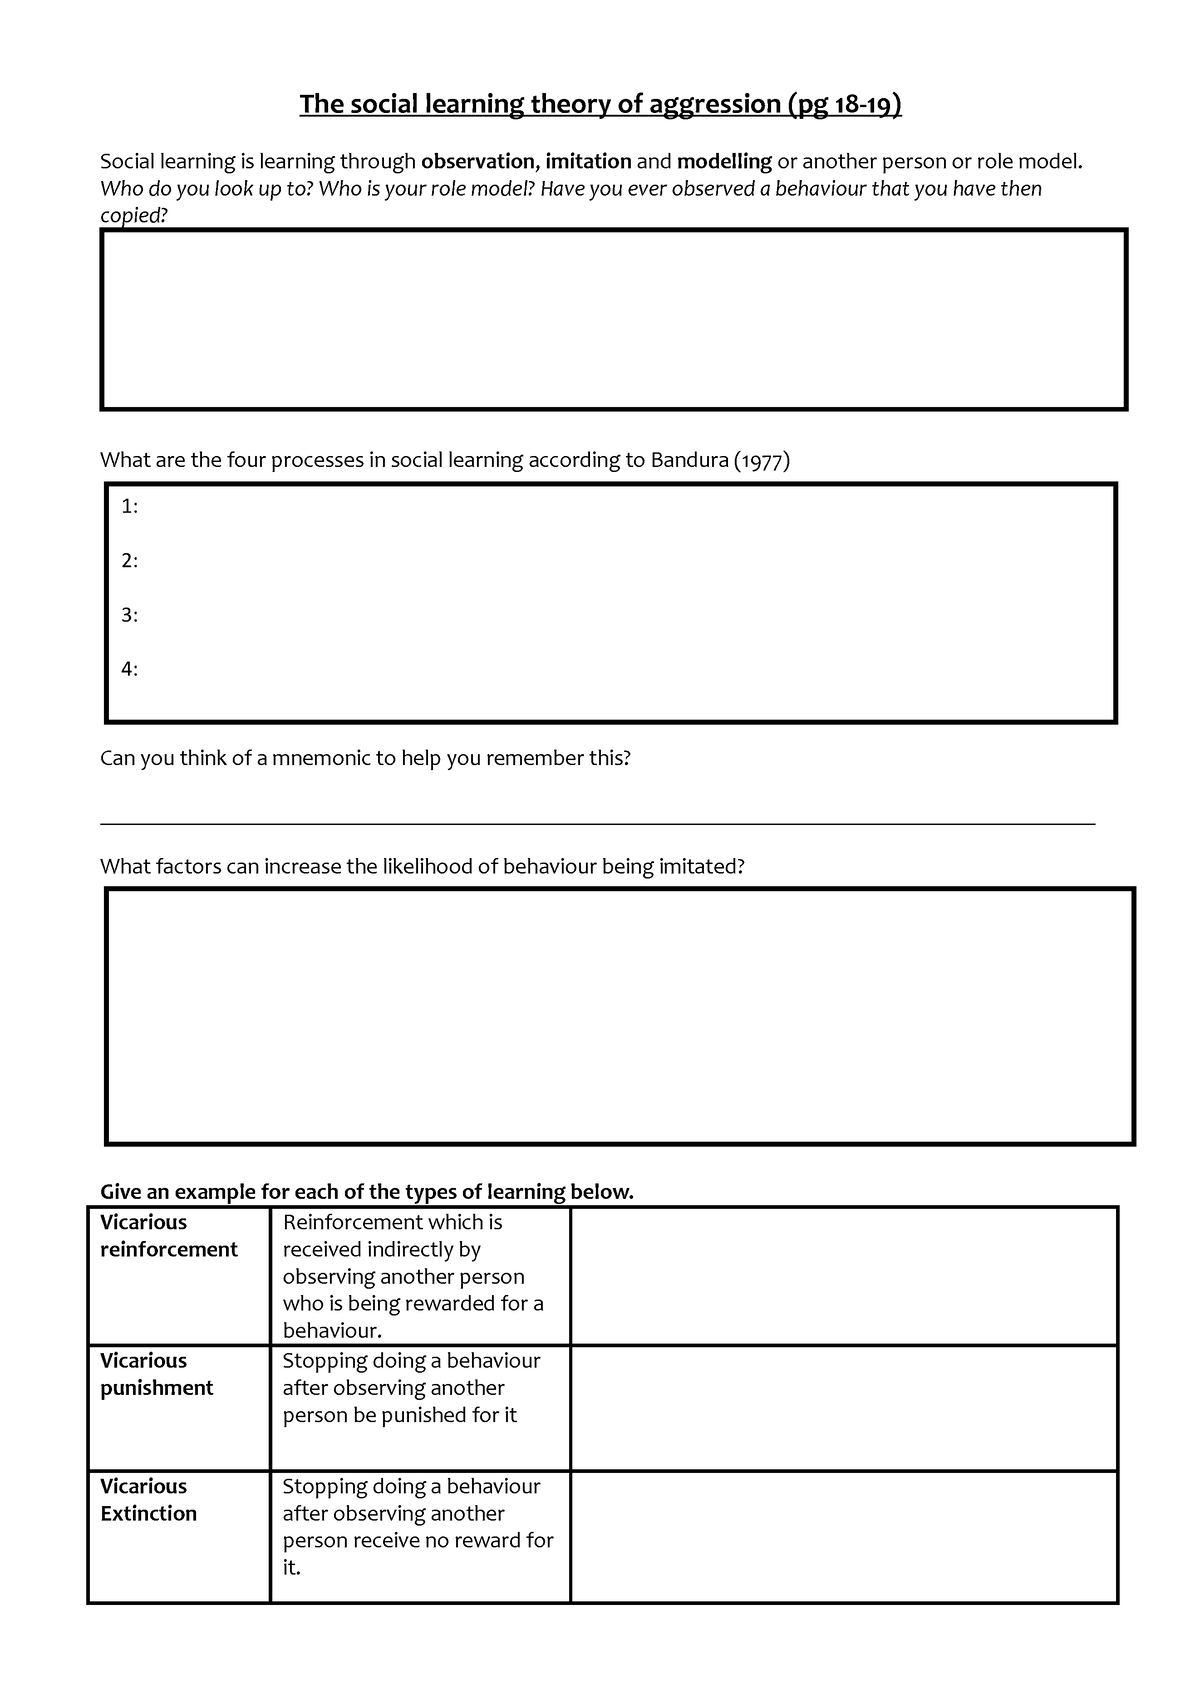 Behaviourism social learning theory worksheet nm 2011 - The social ...